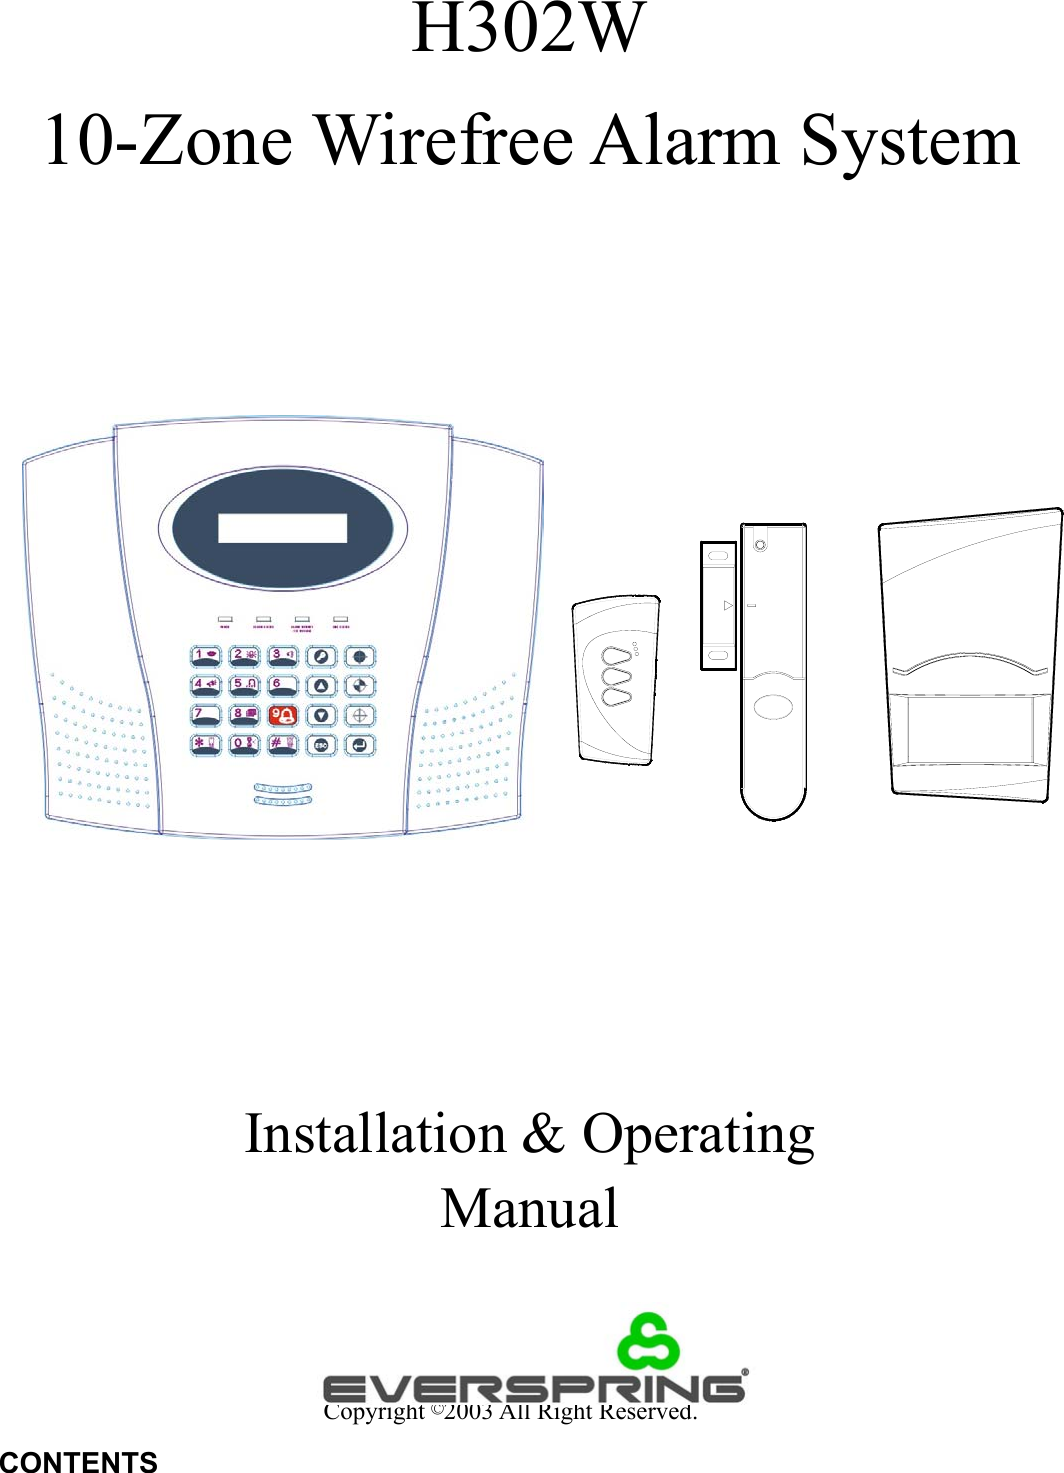  H302W 10-Zone Wirefree Alarm System                                                                      Installation &amp; Operating Manual                         Copyright ©2003 All Right Reserved.  CONTENTS 